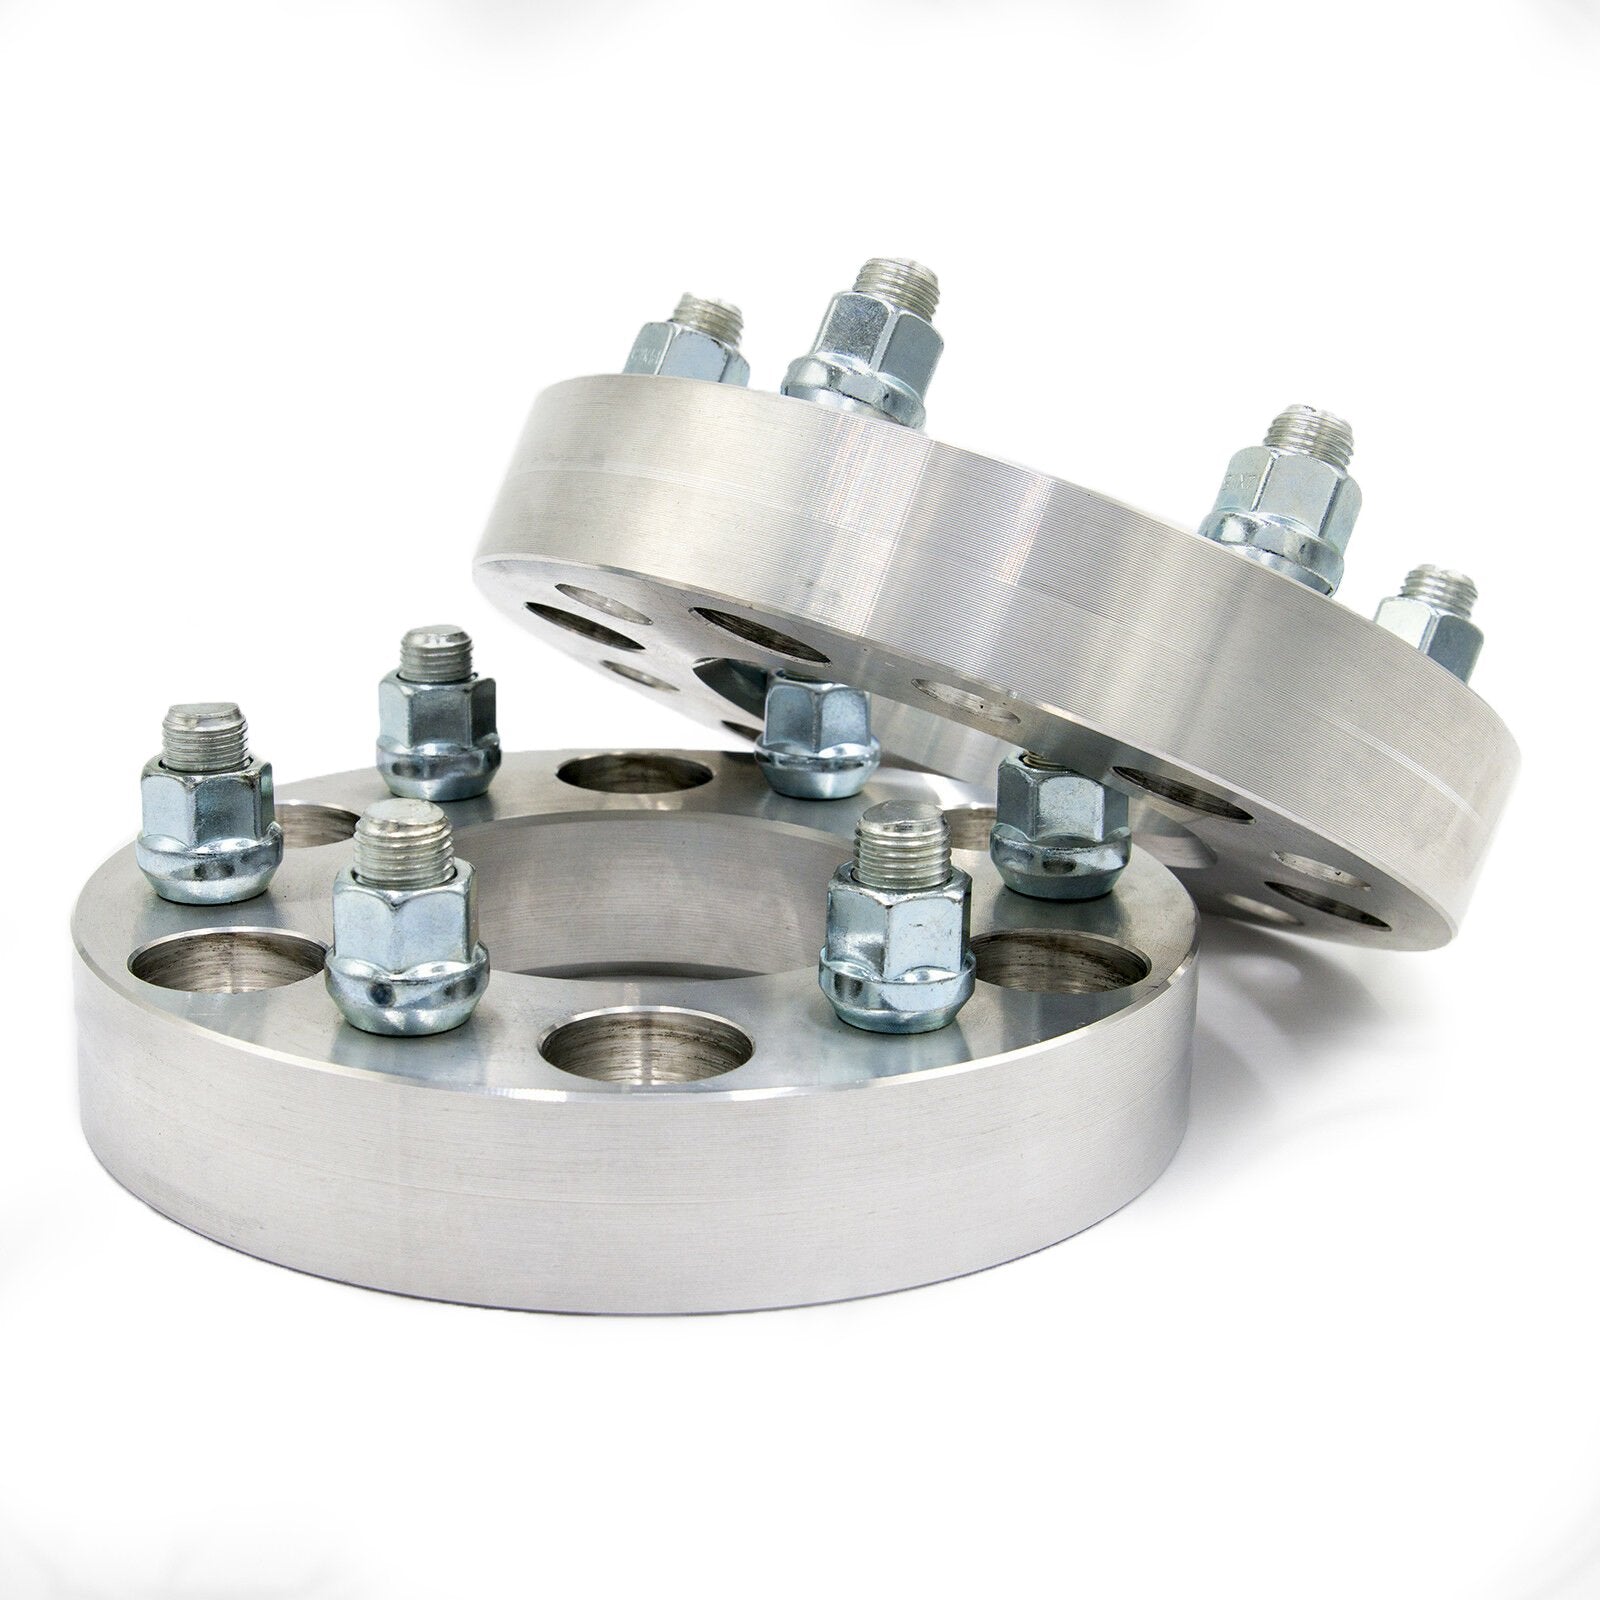 6x5.5 to 6x4.5 Wheel Spacer/Adapter - Thickness: 3/4- 4